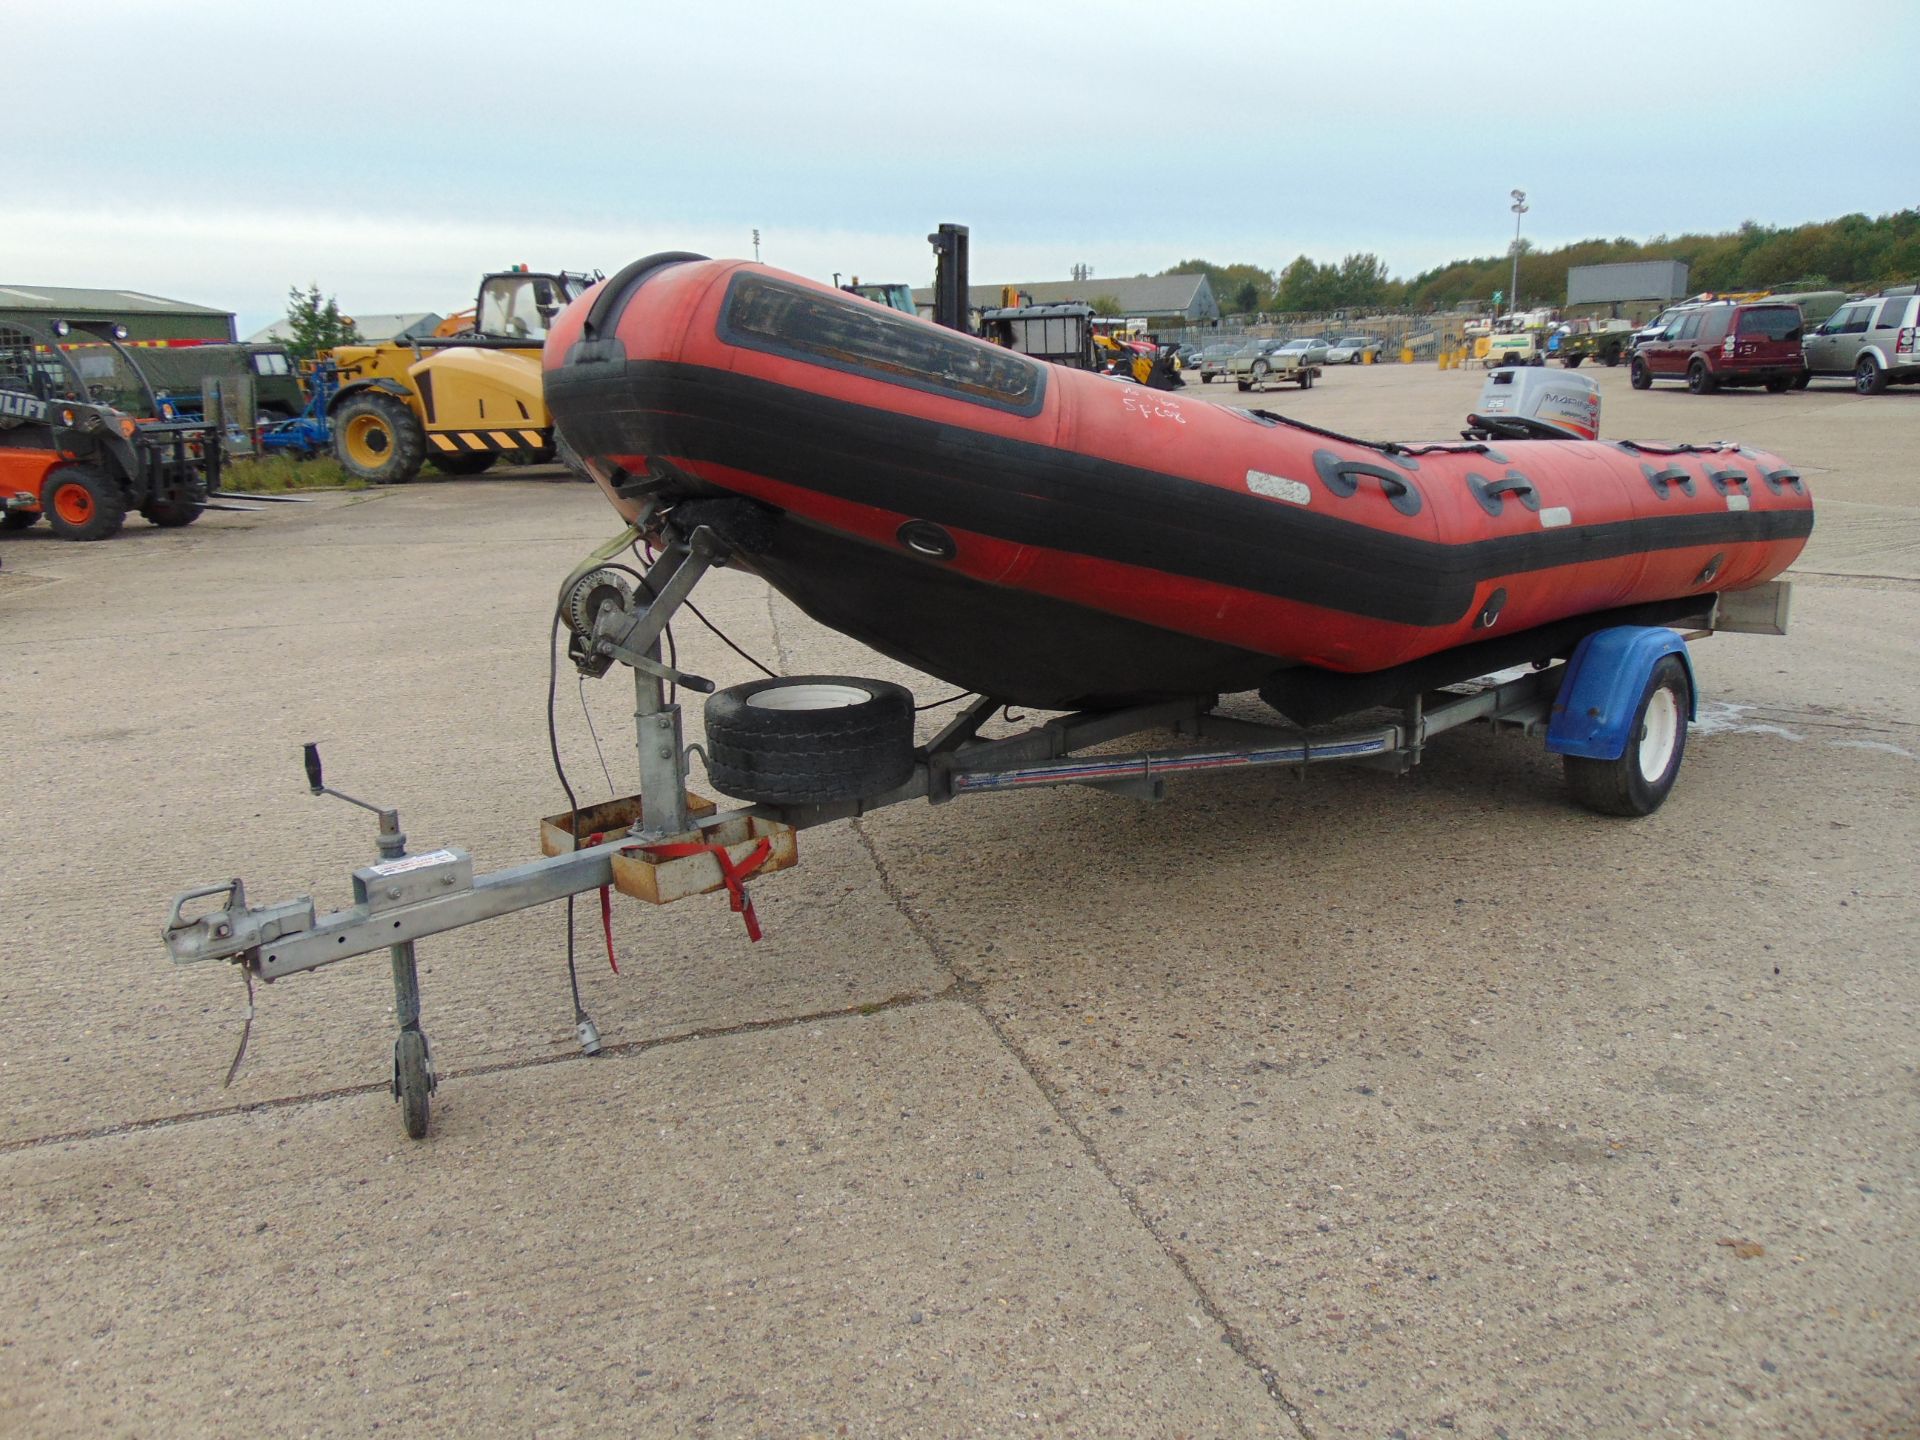 Eurocraft 440 Inflatable Rib C/W Mariner Outboard Motor and Transportation Trailer - Image 6 of 26